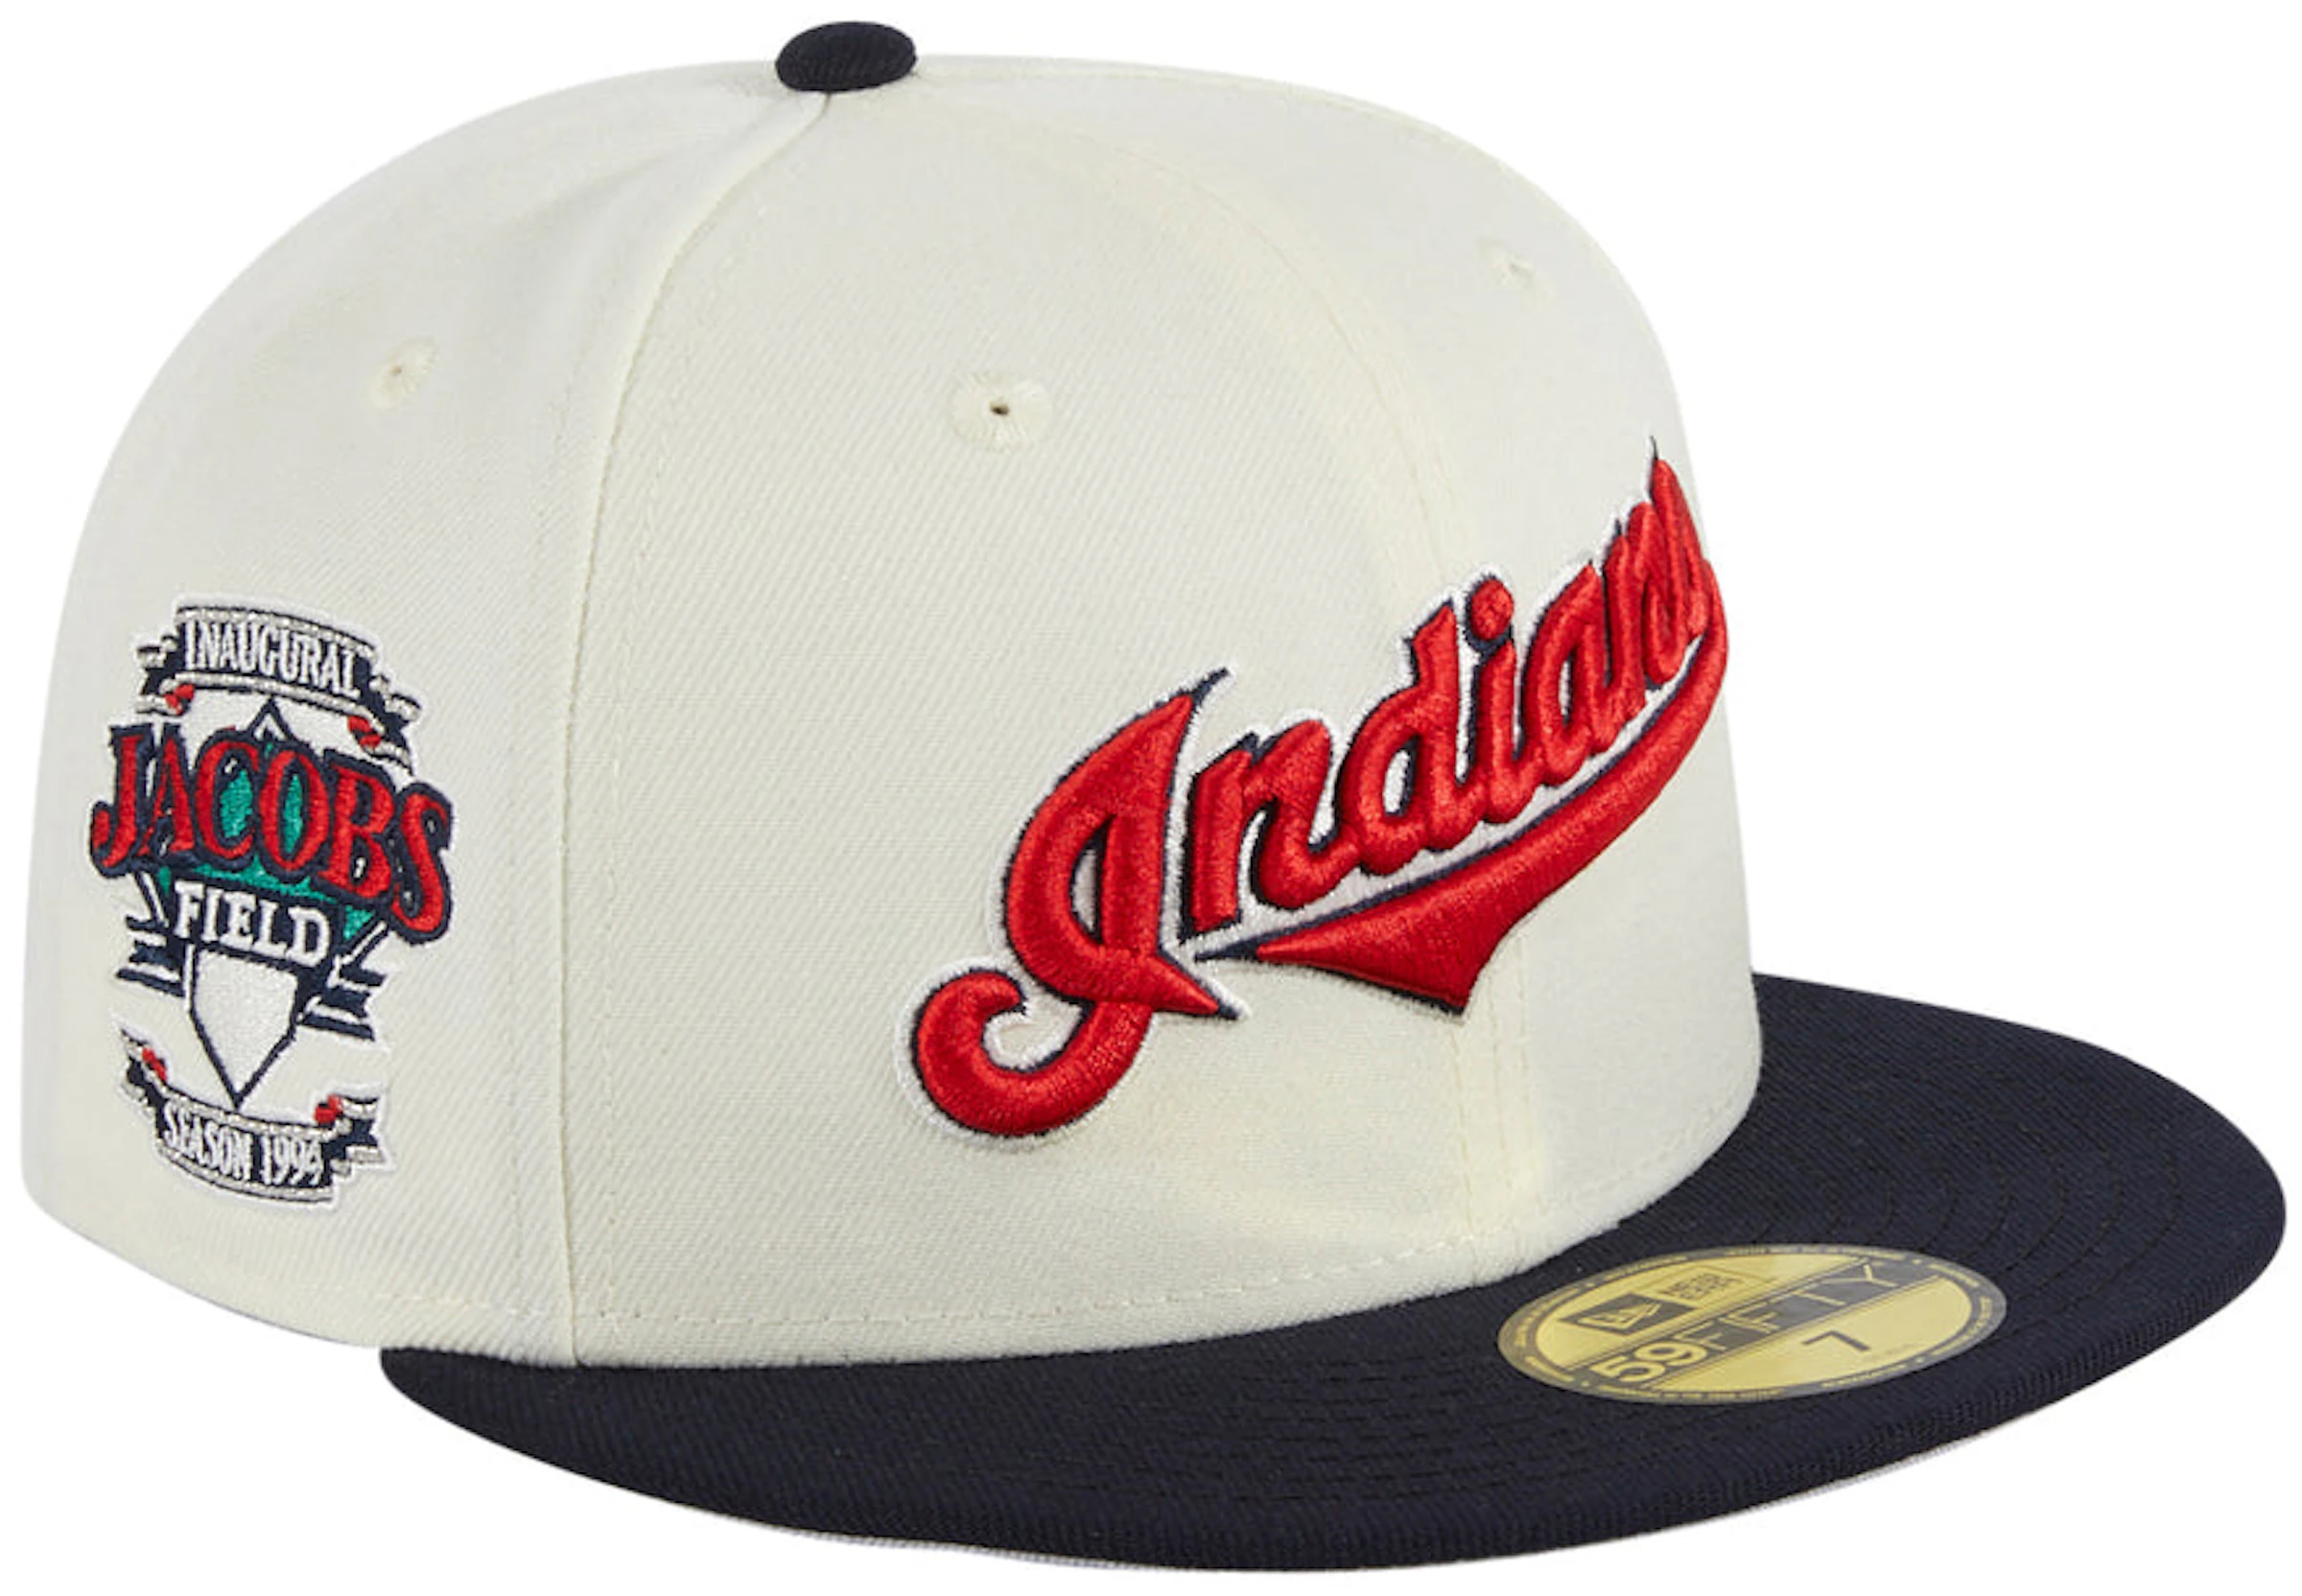 New Cleveland Indians Jacobs Field Patch Hat Club Exclusive 59Fifty Fitted Hat White/Navy - SS22 - US